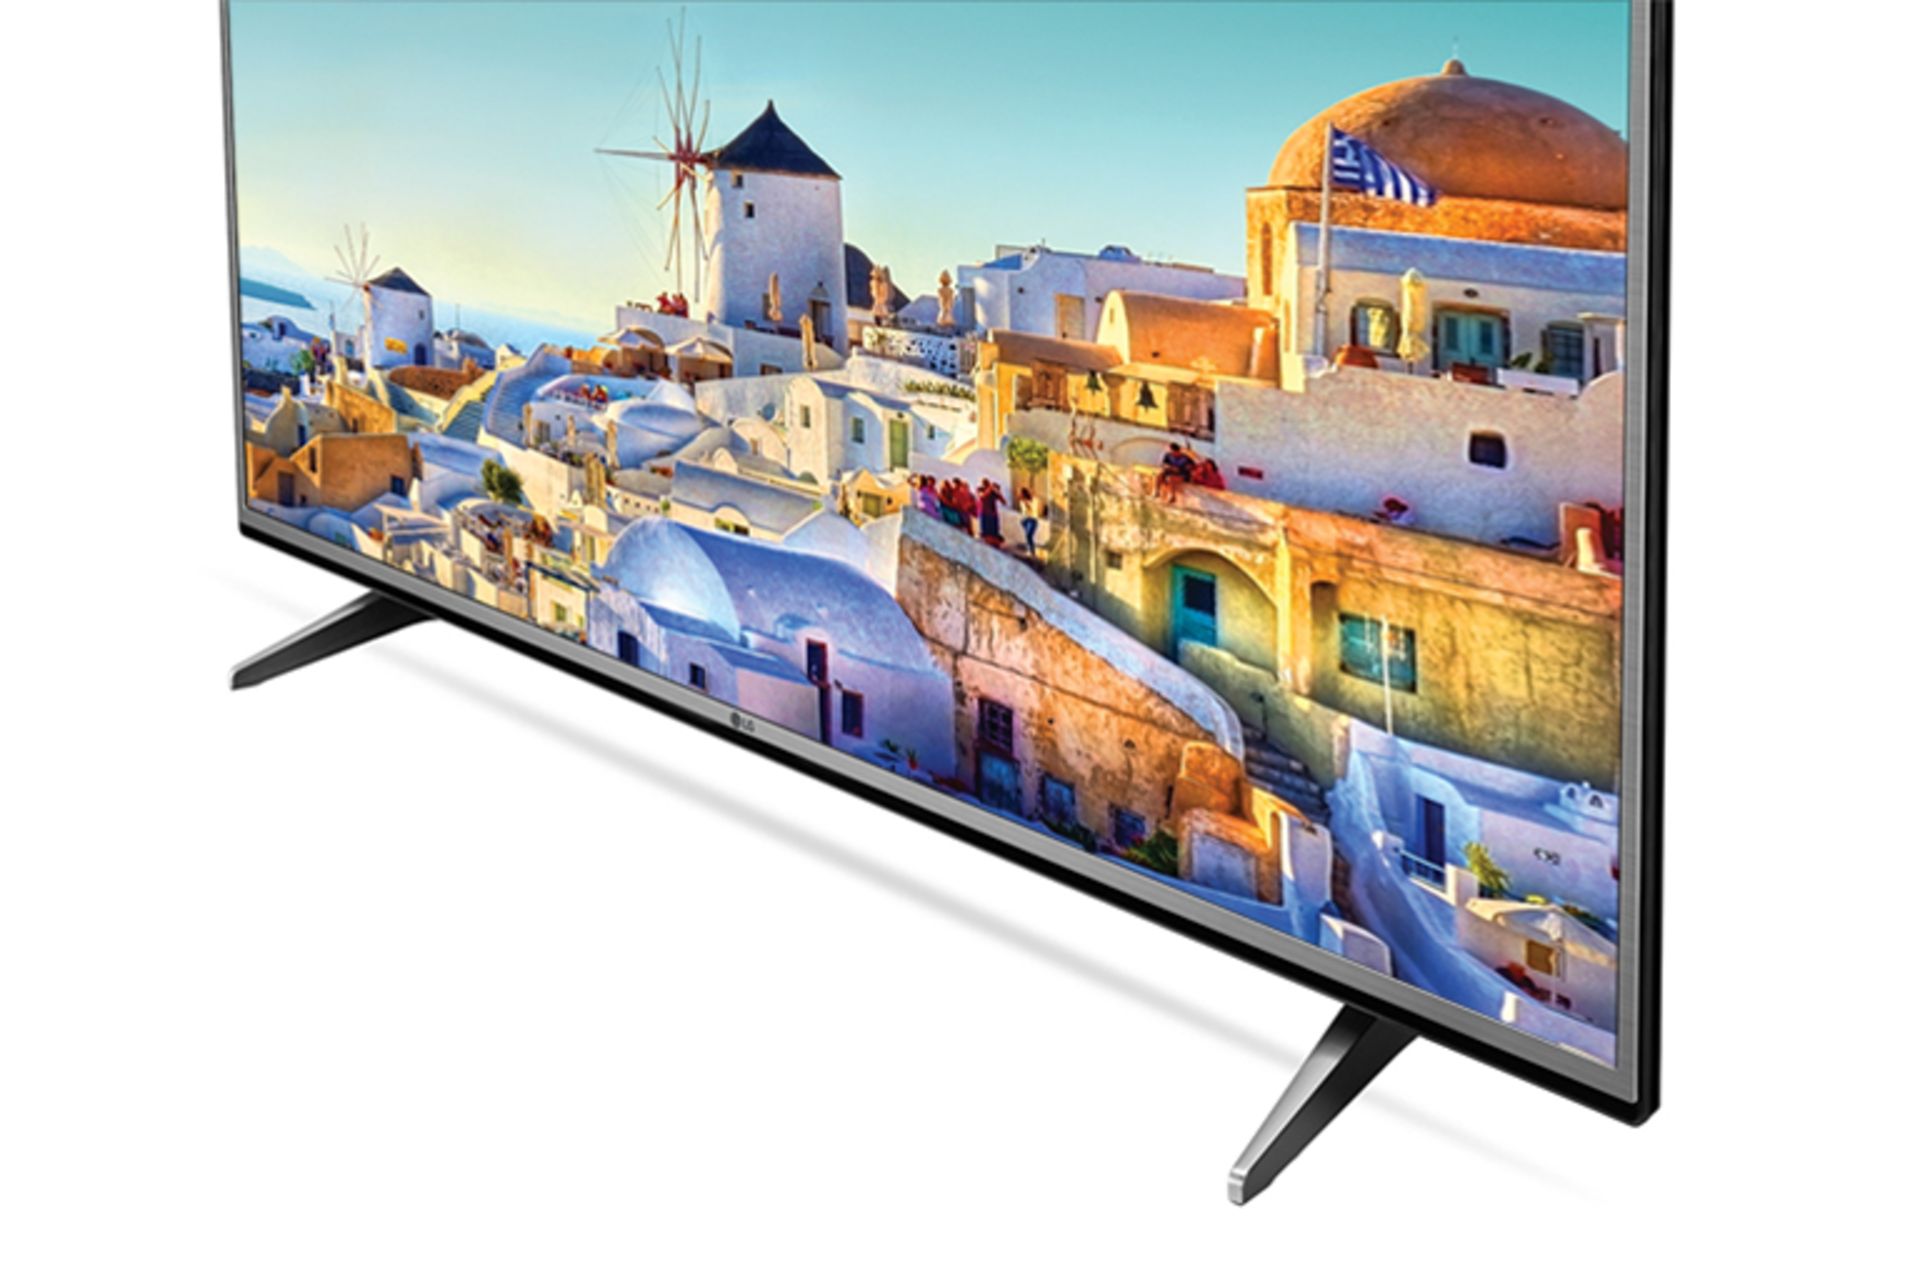 + VAT Grade A LG 65" 65UH6159 4K Ultra HD LED Smart TV - Freeview HD - WiFi Built In - Webos - Image 3 of 3